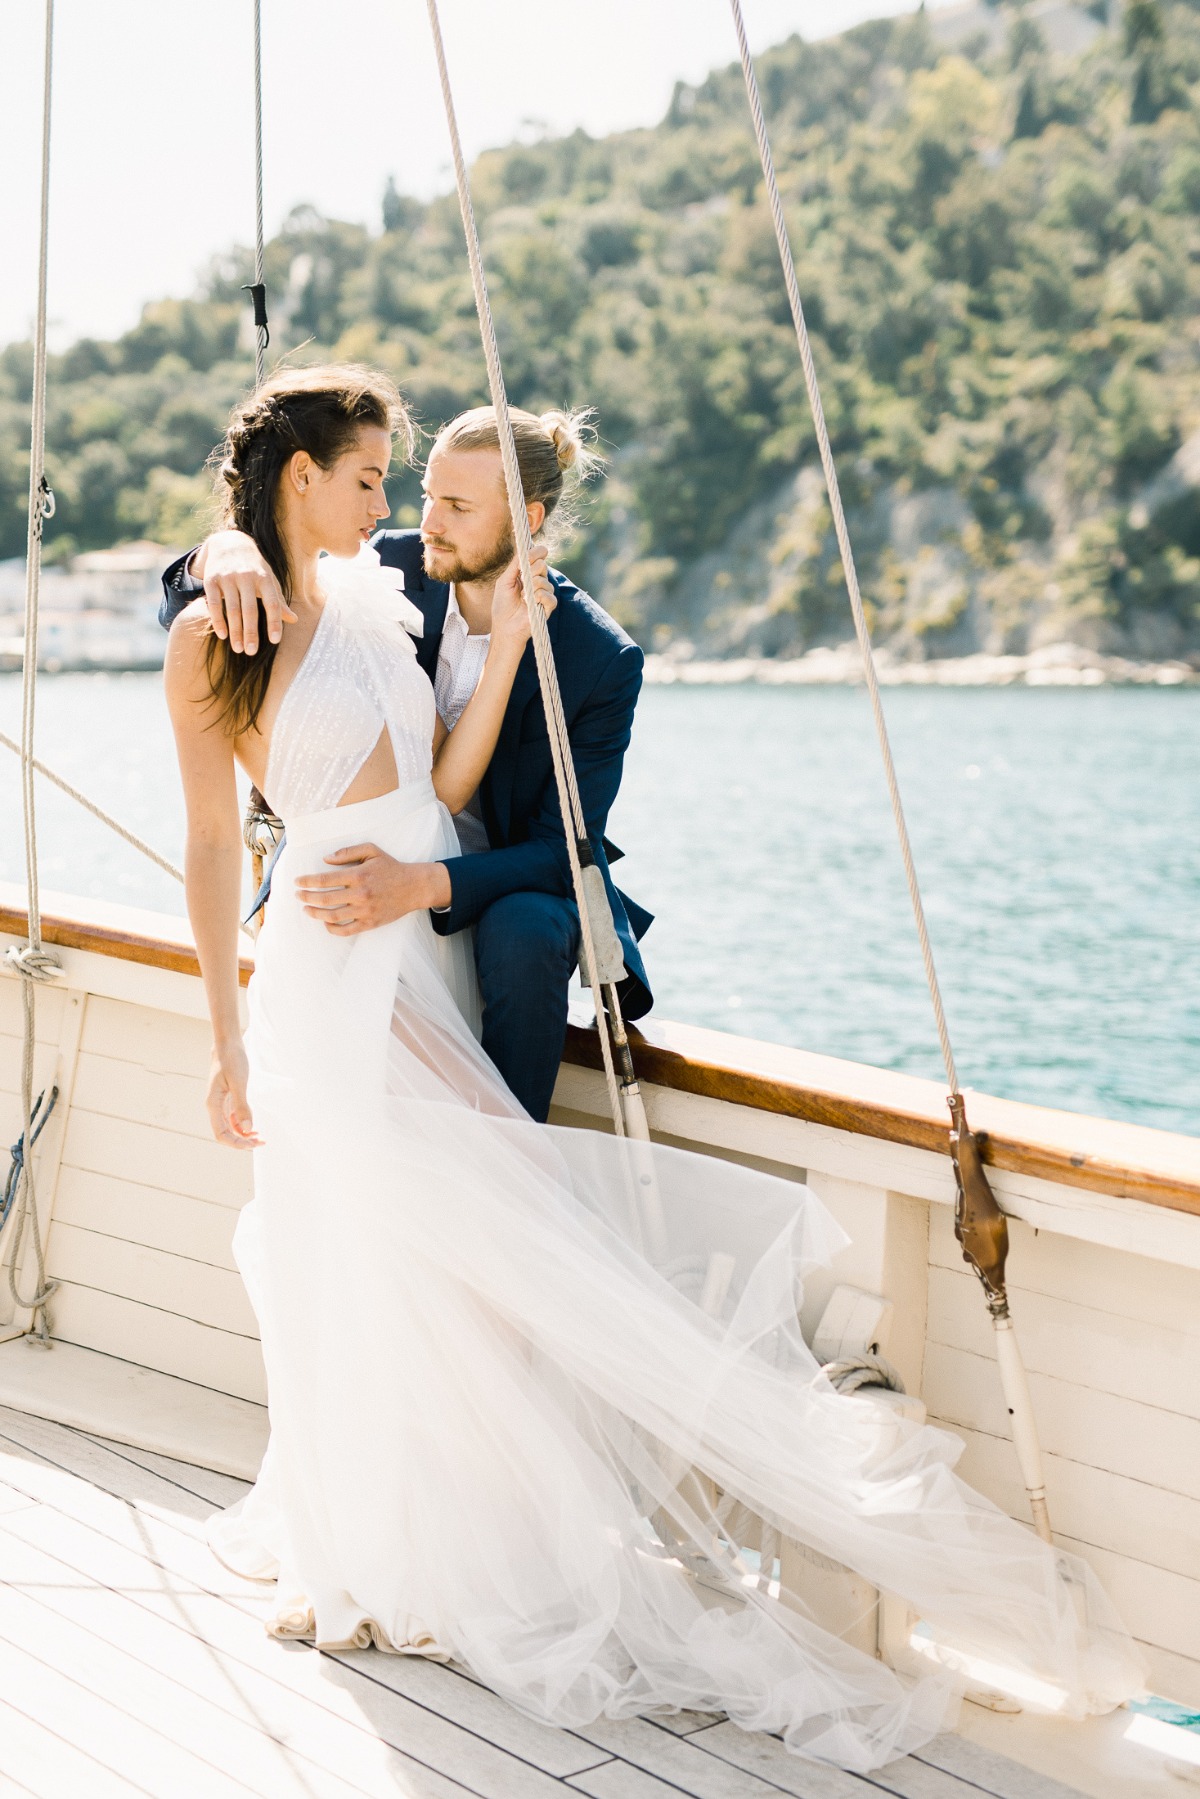 Between Land and SeaâA Wedding Inspiration Shoot On The French Riviera